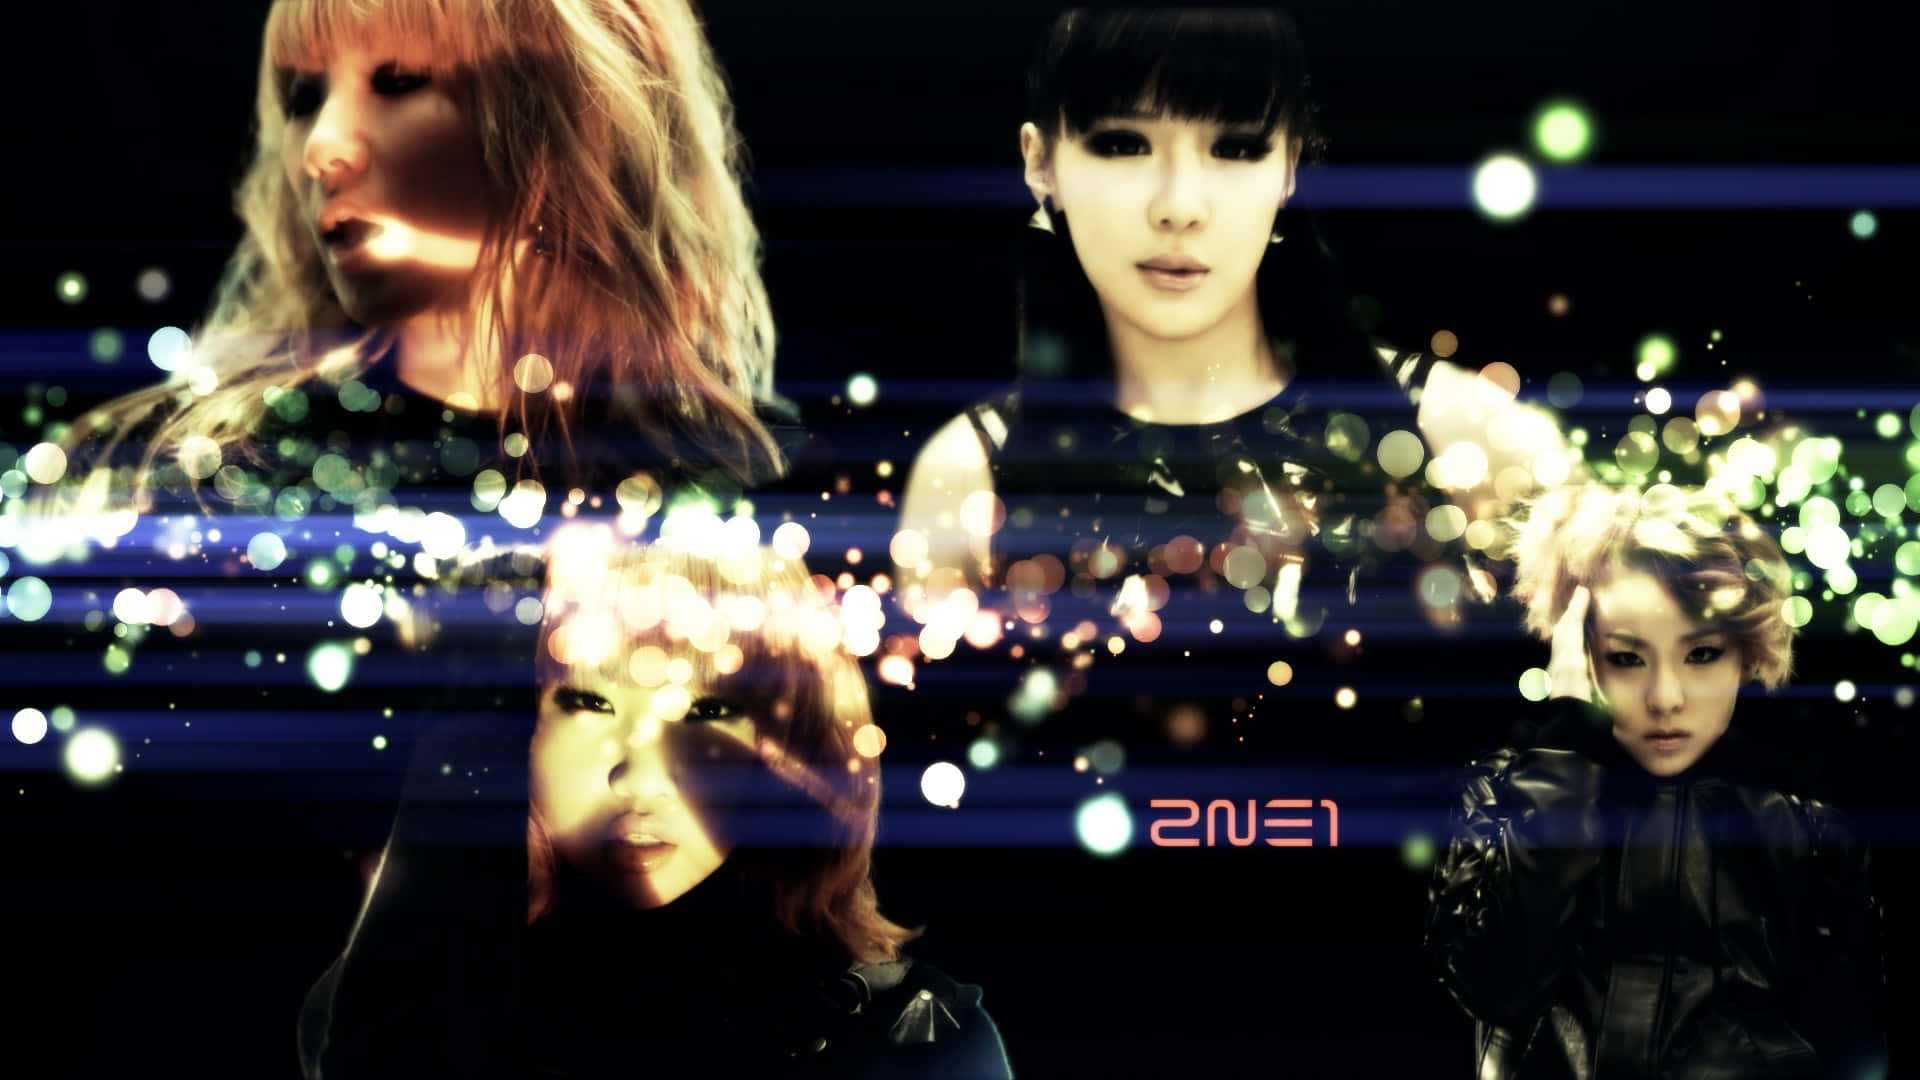 Upbeat and Colorful: 2NE1 performs at the MTV EMAs